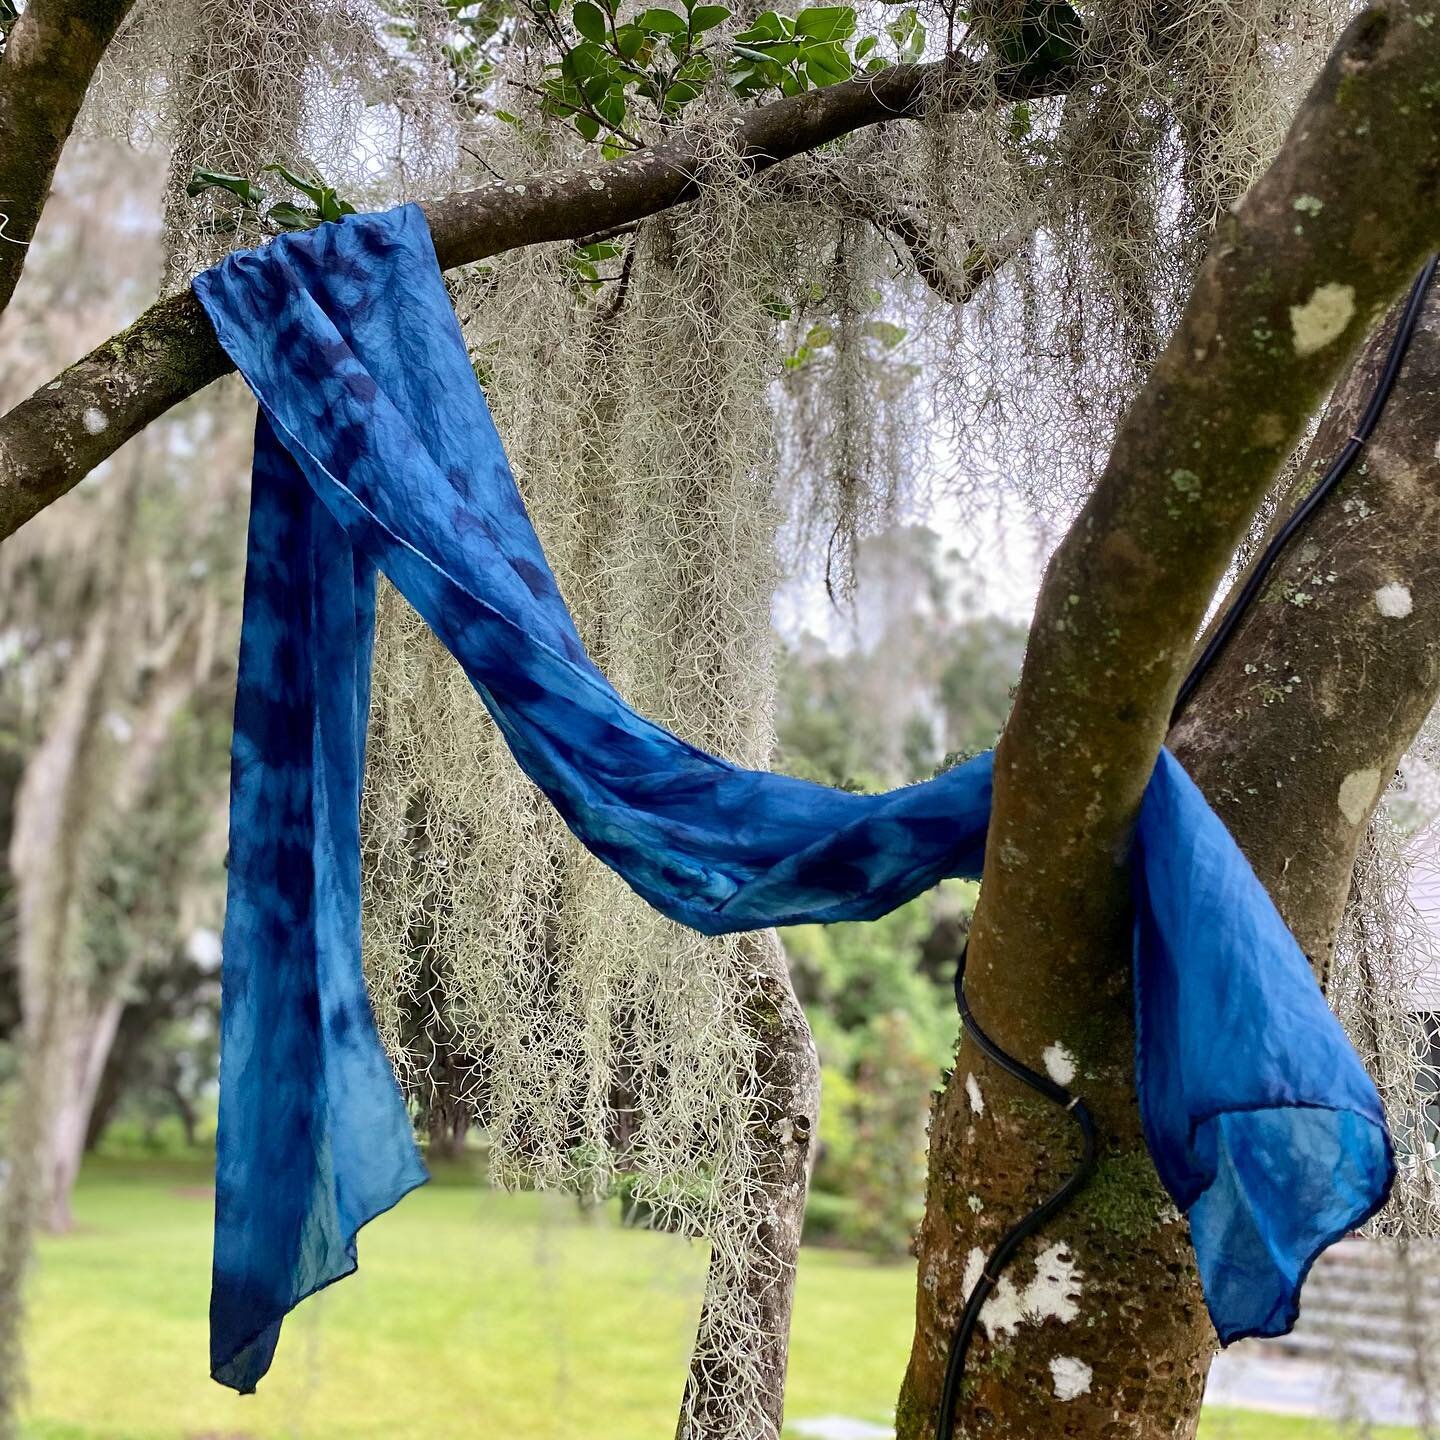 &ldquo;Blue swag in oak tree.
Like indigo in the land of free.&rdquo;&hellip; unknown
👉🏻 We have 3 more spots at this beautiful plantation, once Eliza Lucas Pinkney&rsquo;s son Charles&rsquo; plantation. Come join us and harvest some indigo, make a